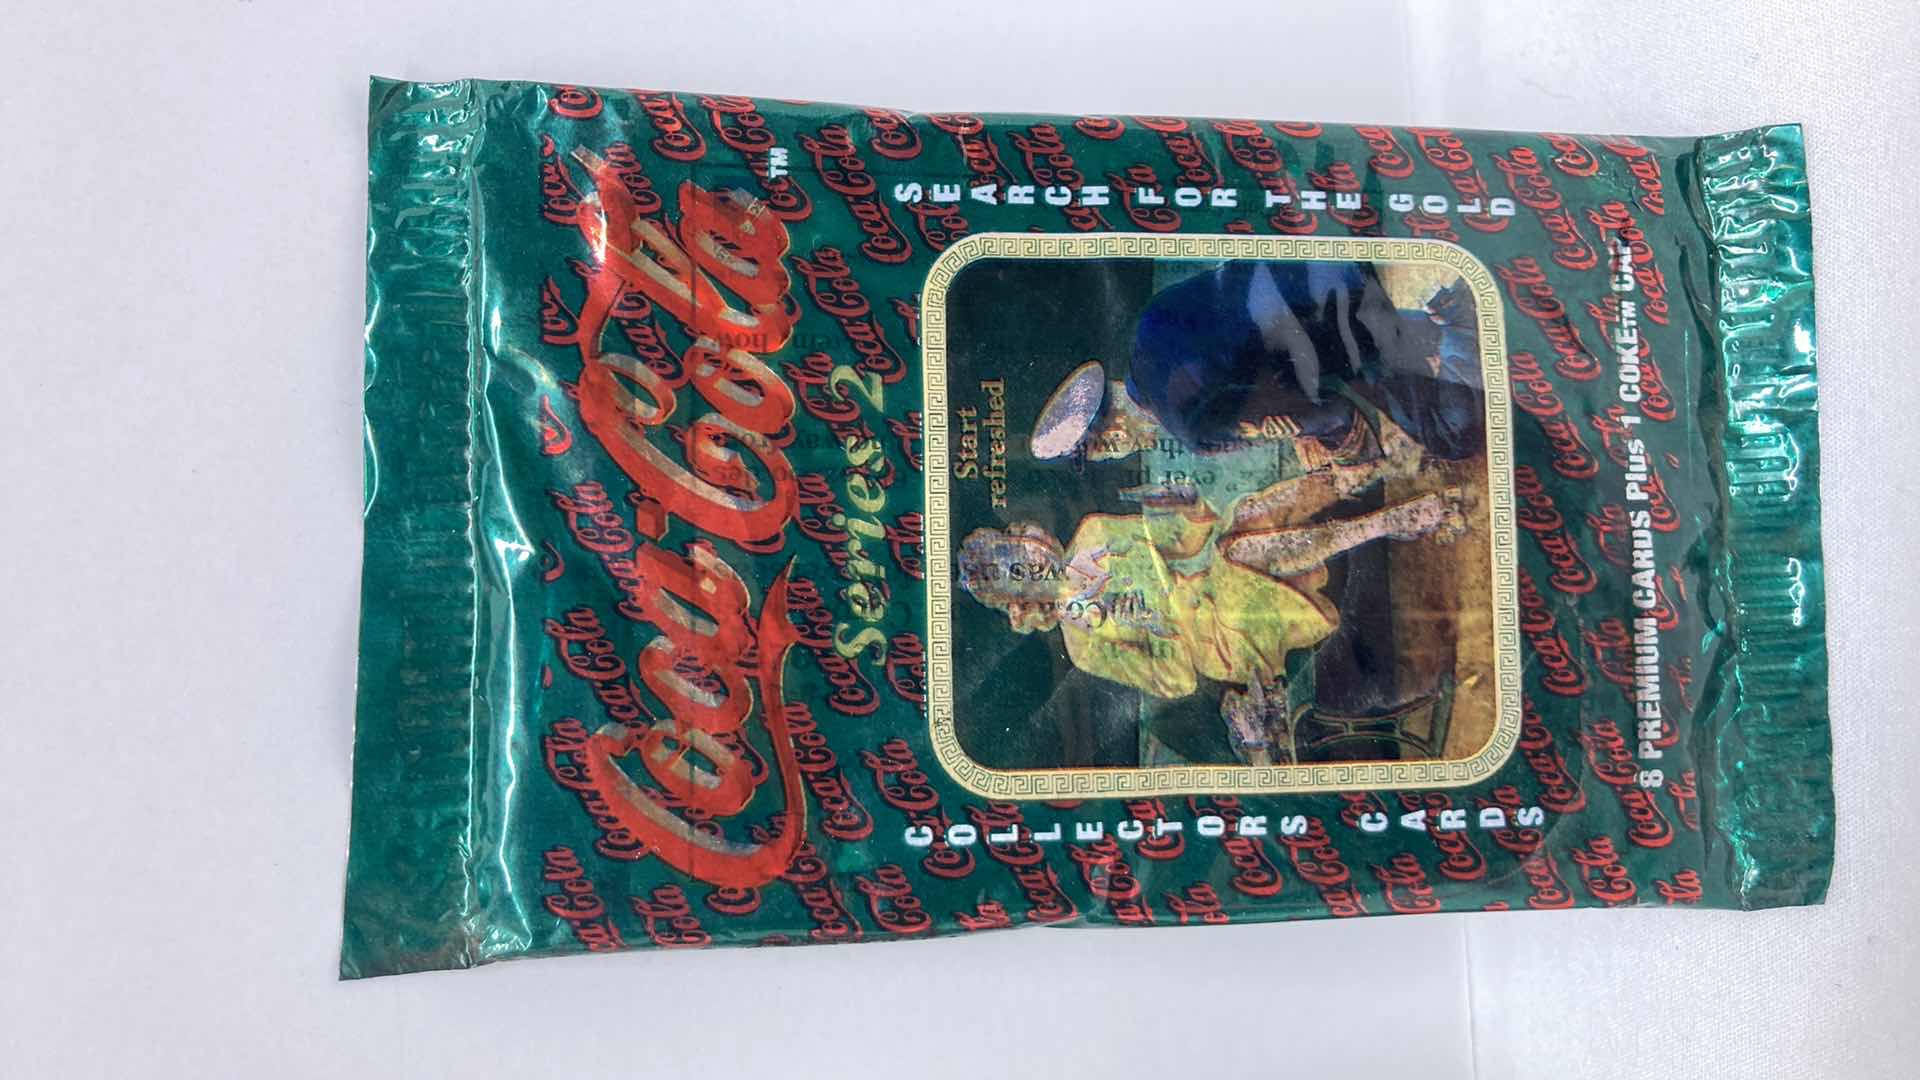 Photo 5 of COCA-COLA SERIES 2 SEARCH FOR GOLD PREMIUM COLLECTOR CARDS (4) SEALED